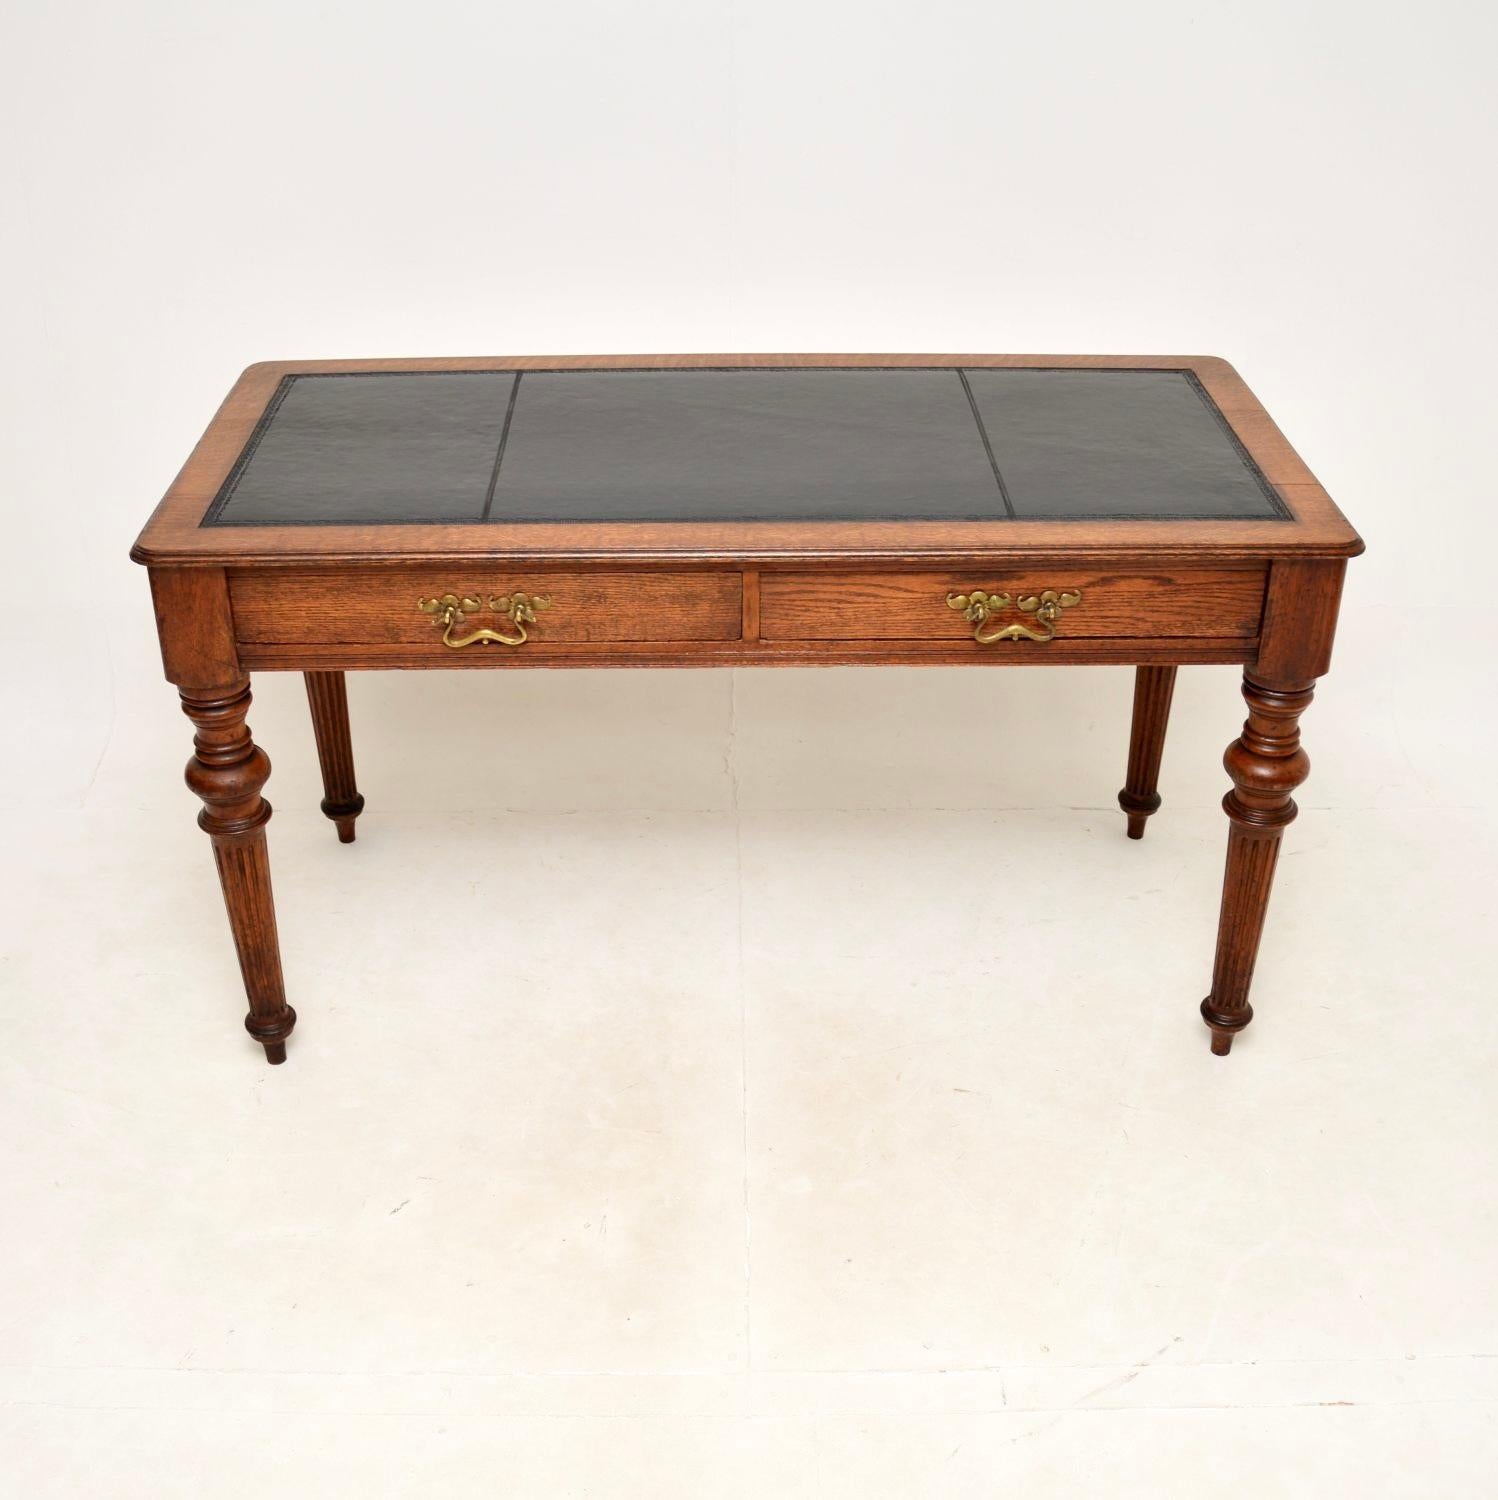 An impressive antique Victorian oak leather top writing table / desk. This was made in England, it dates from around the 1870-1890 period.

It is of superb quality, solid oak throughout with a lovely inset faded black leather writing surface. It